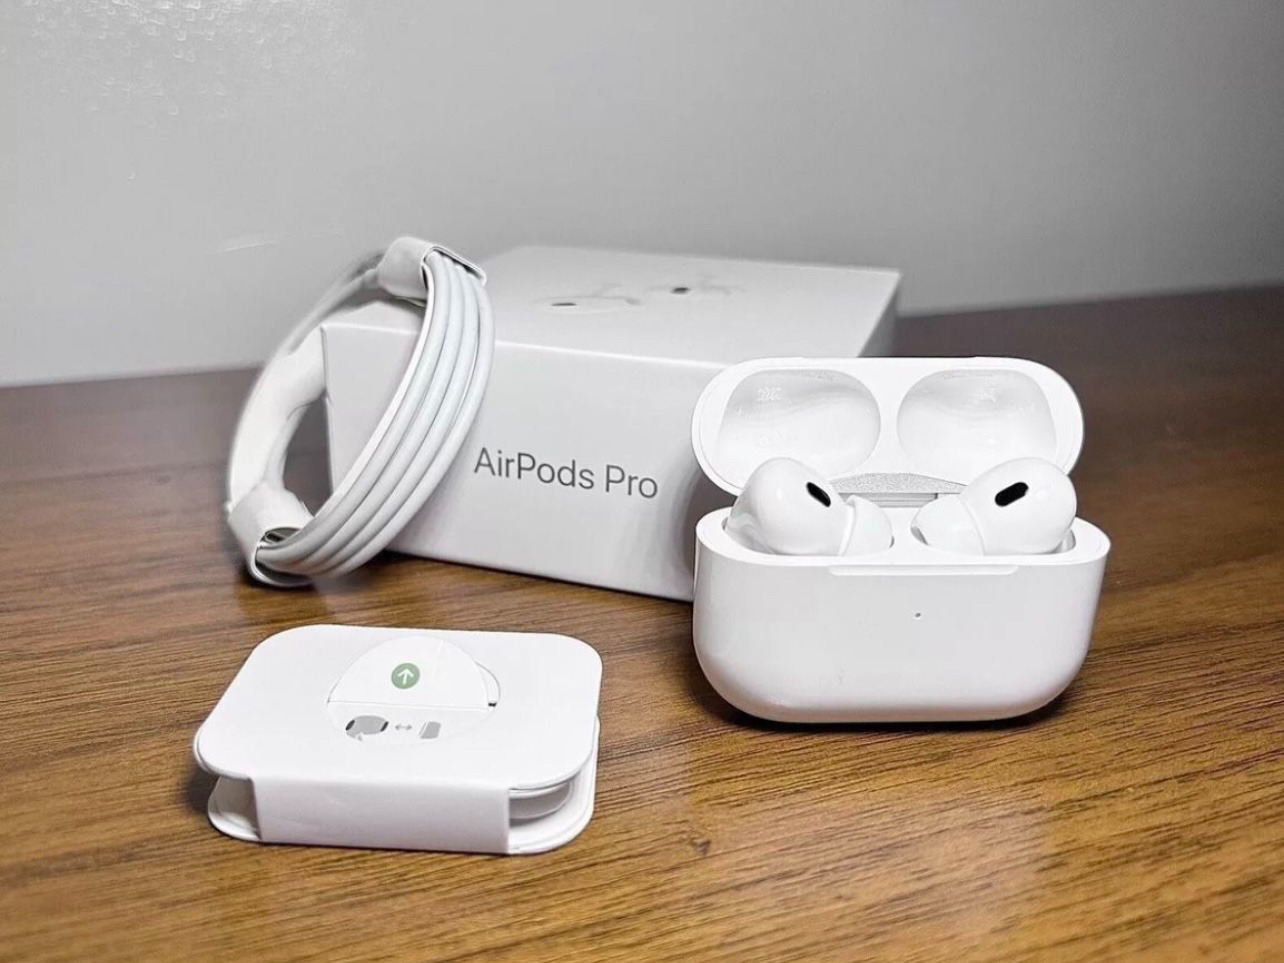 Apple AirPods Pro 2nd Gen Wireless Earbuds with MagSafe Charging Case - White